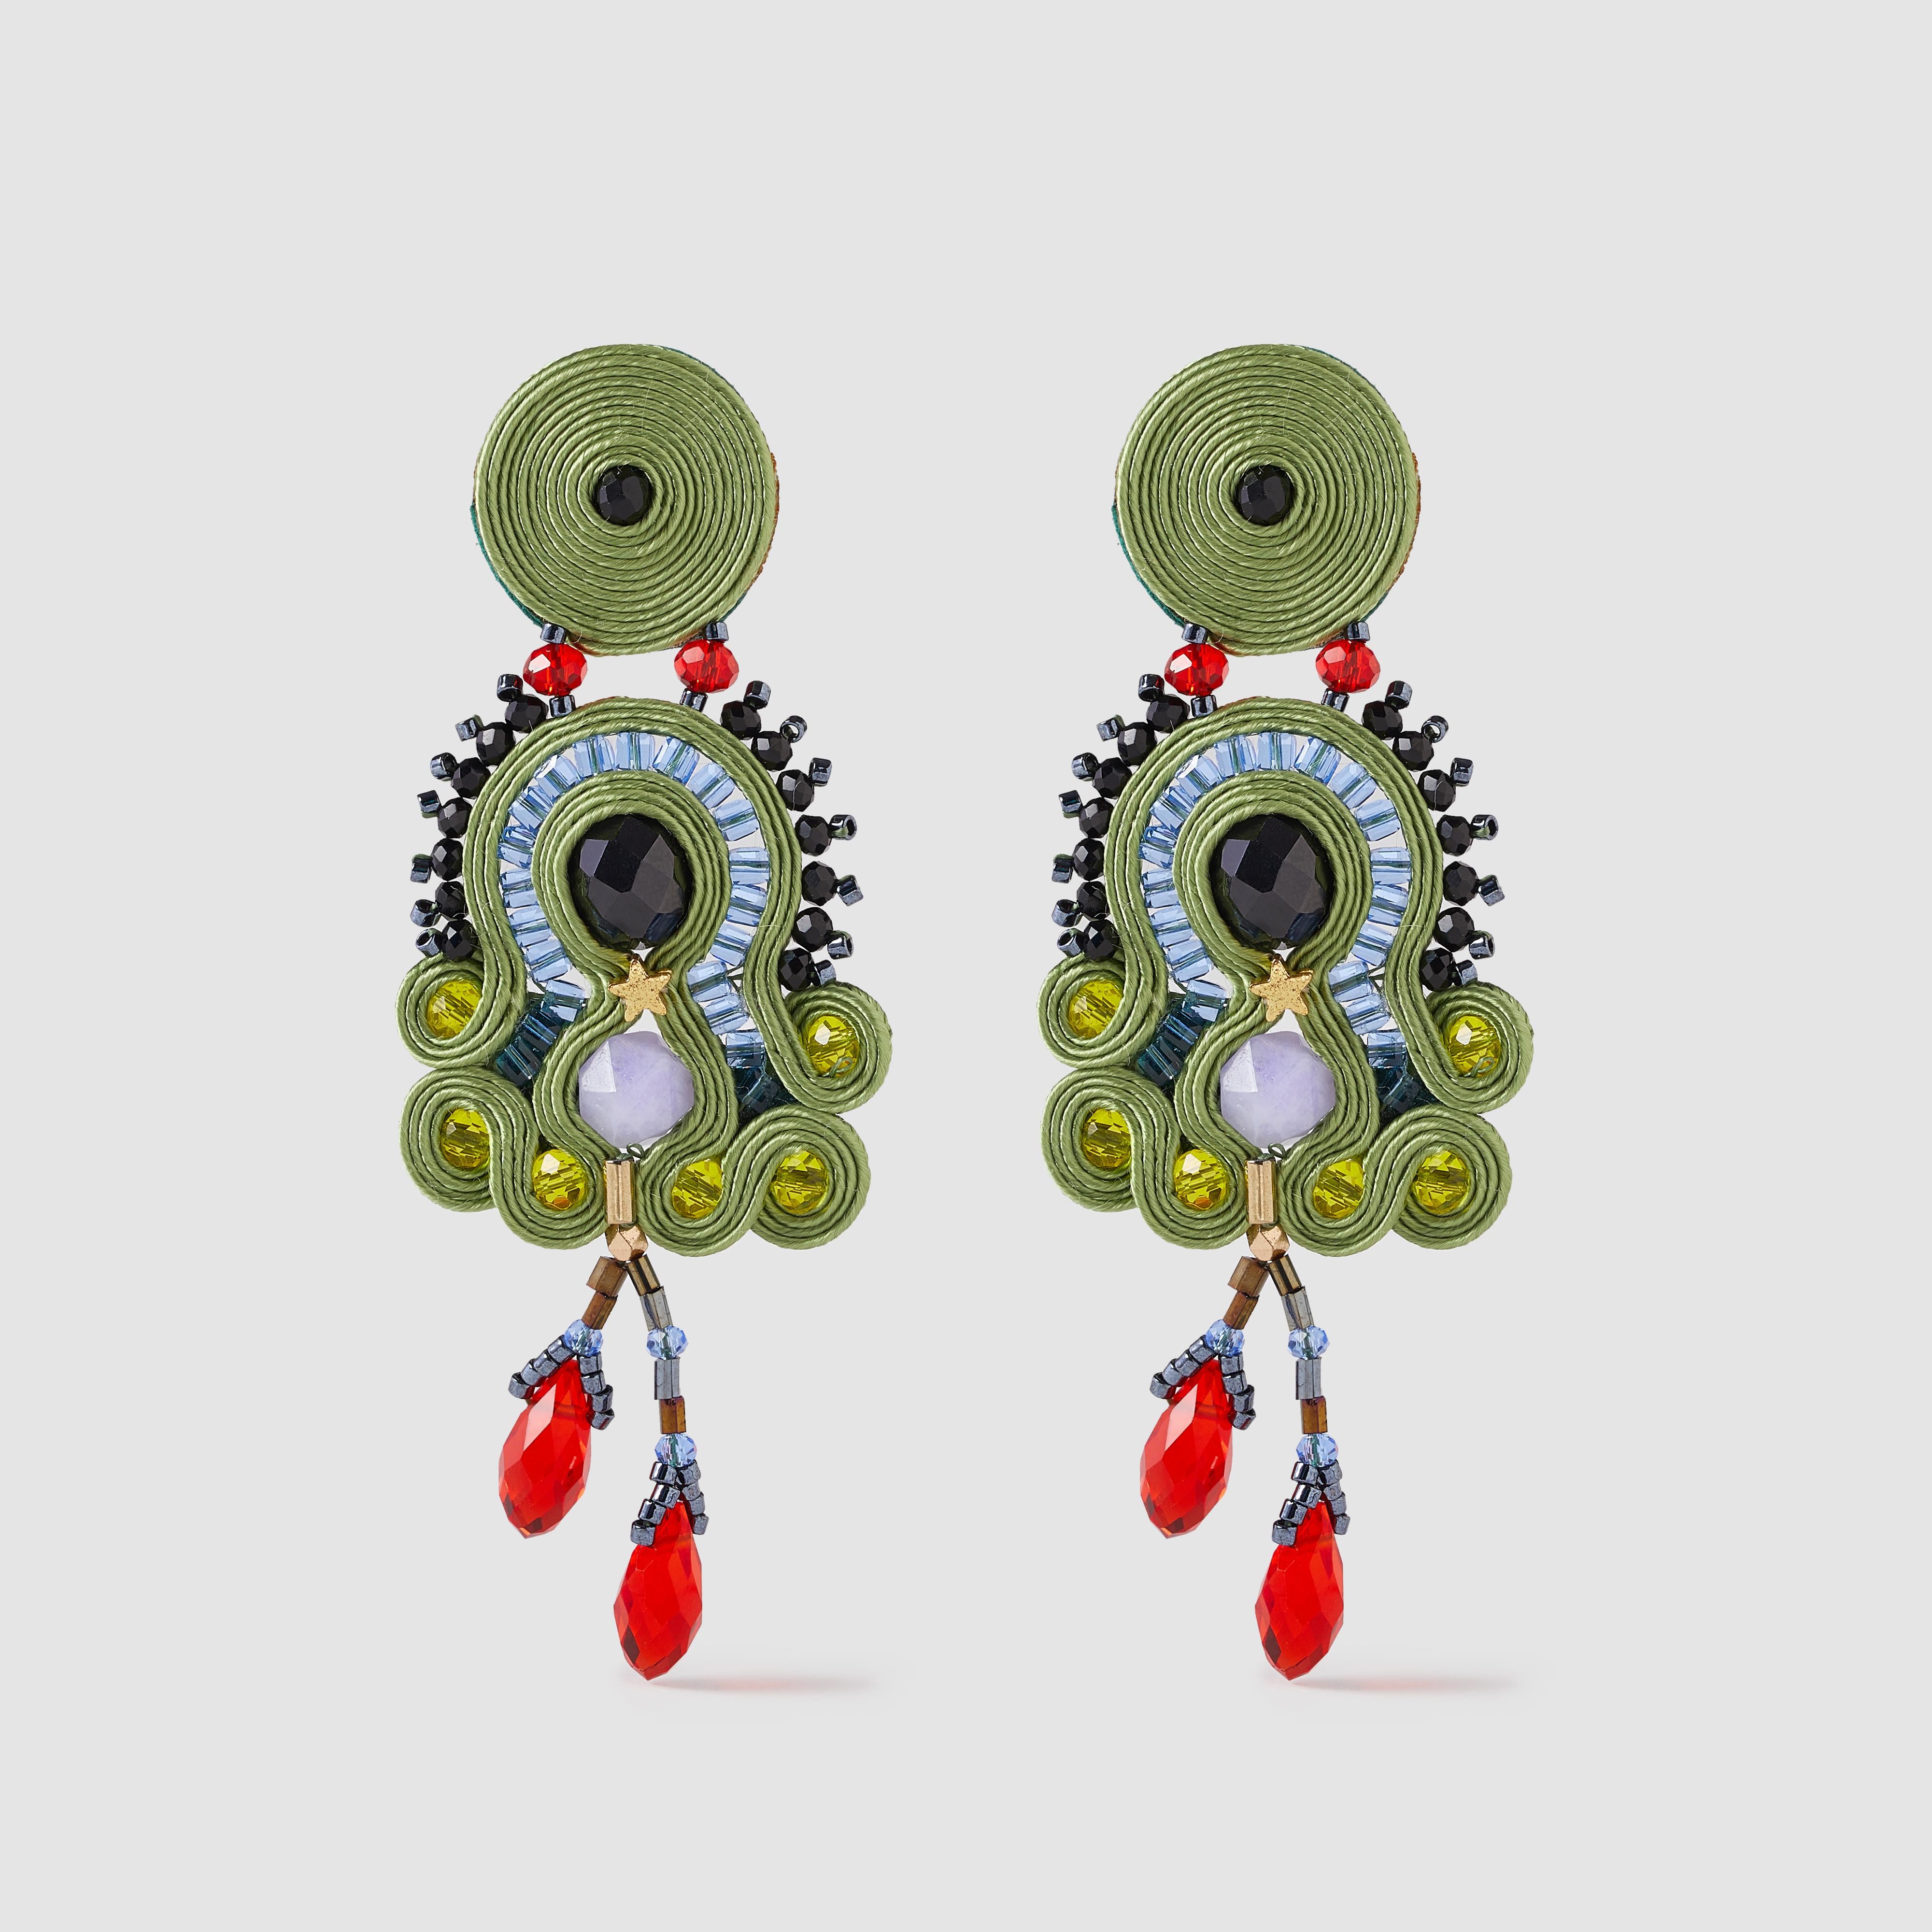 Musula Personalissima Nicoletta Forest Soutache Earrings
Soutache earrings made with silk rayon and crystal beads & silver closure

Hand-sewn earrings.
Rayon yarn 2mm.
Agates, hematite and glass beads.
Silver nut XL
Length 9cm 
Ultralight,